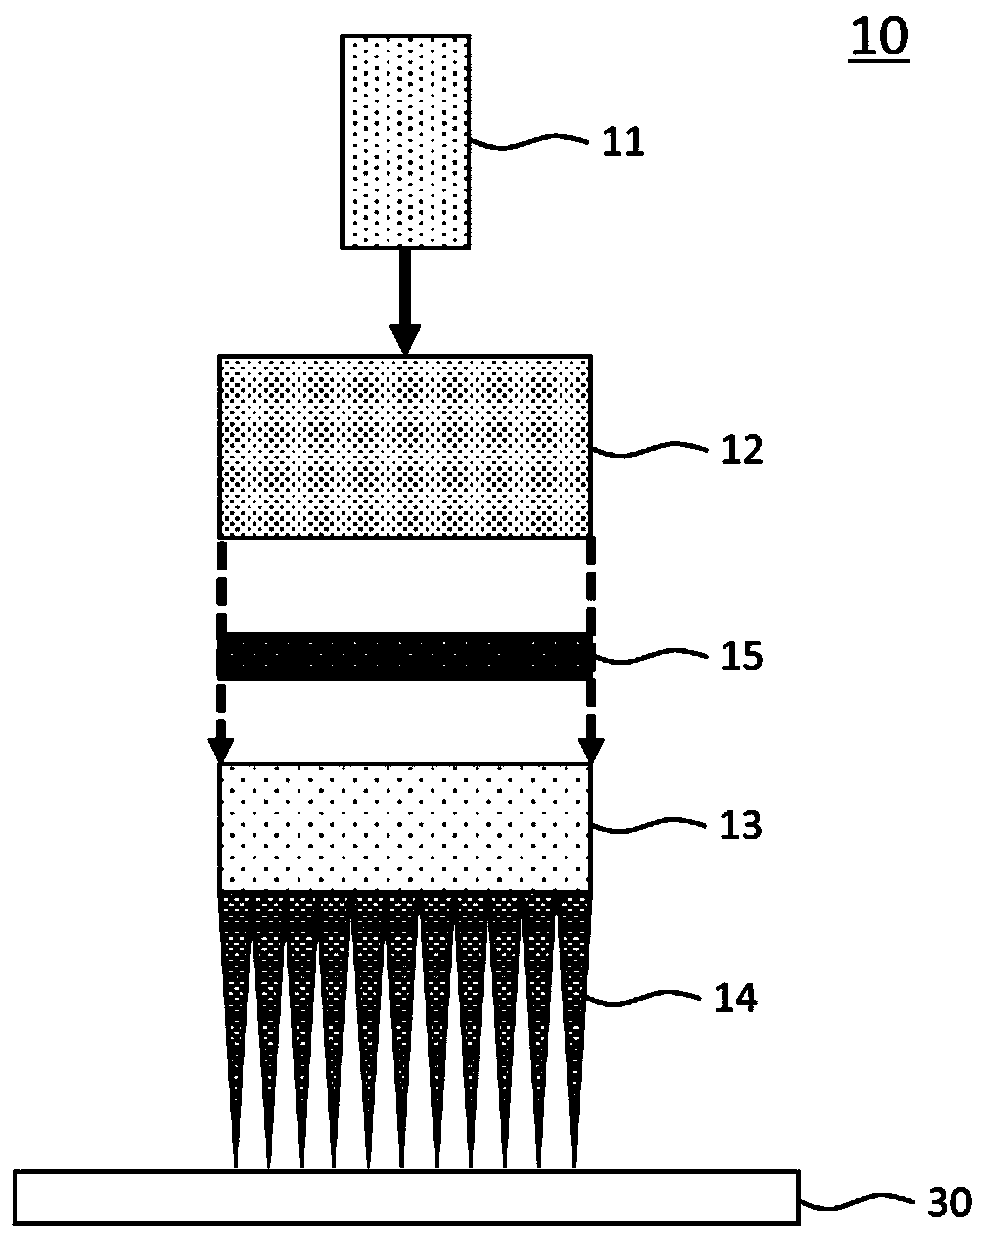 Laser irradiation device, thin-film transistor manufacturing method, program, and projection mask